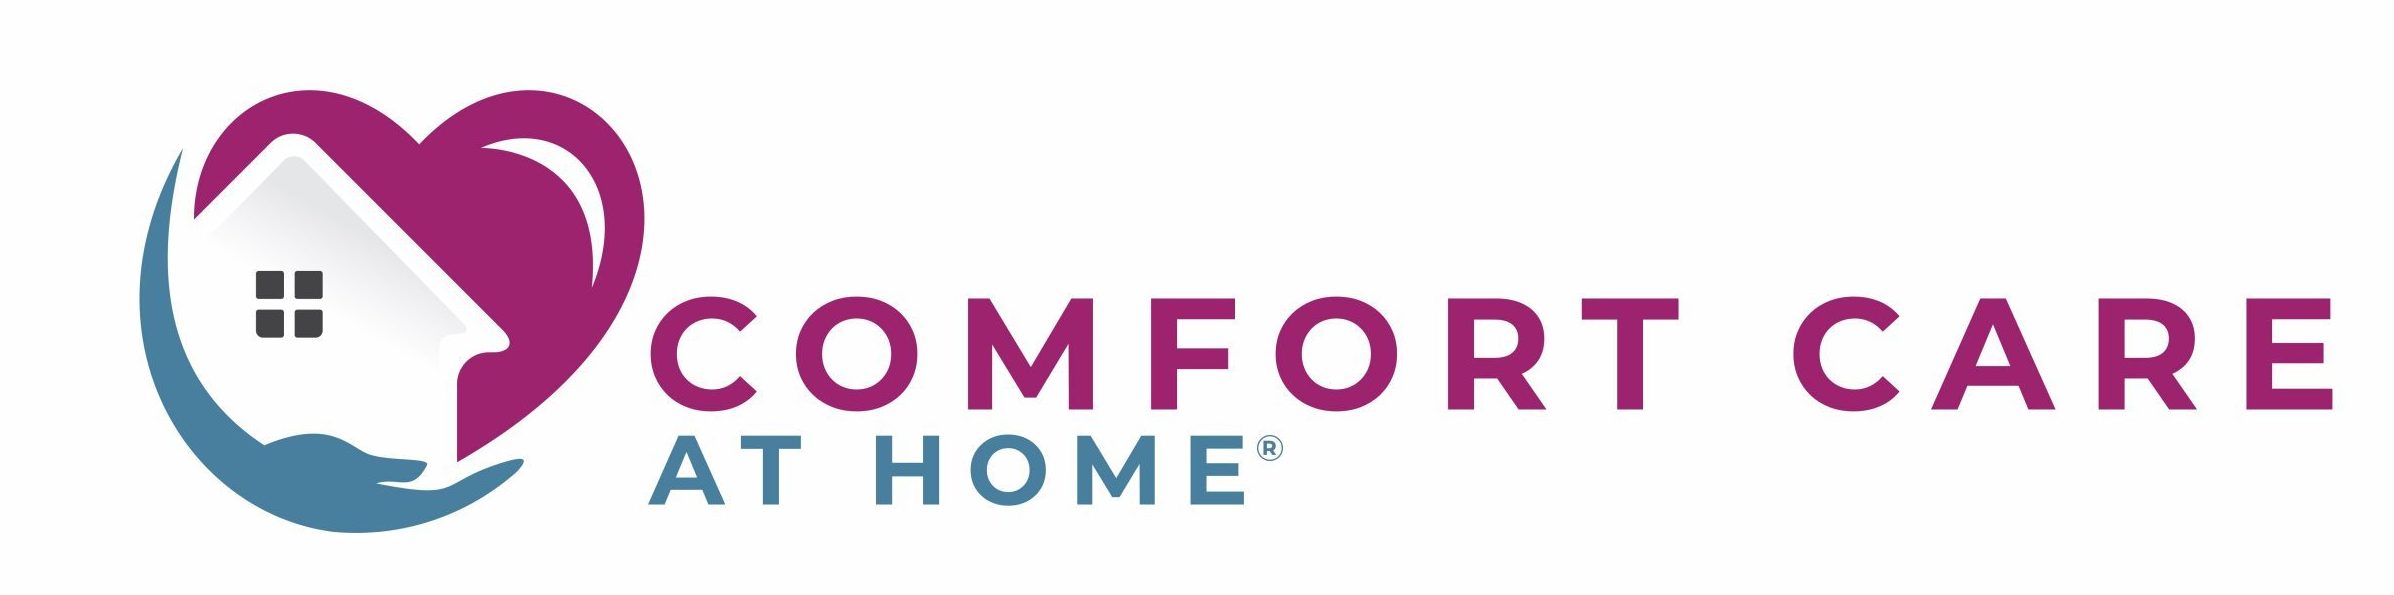 Comfort Care At Home®